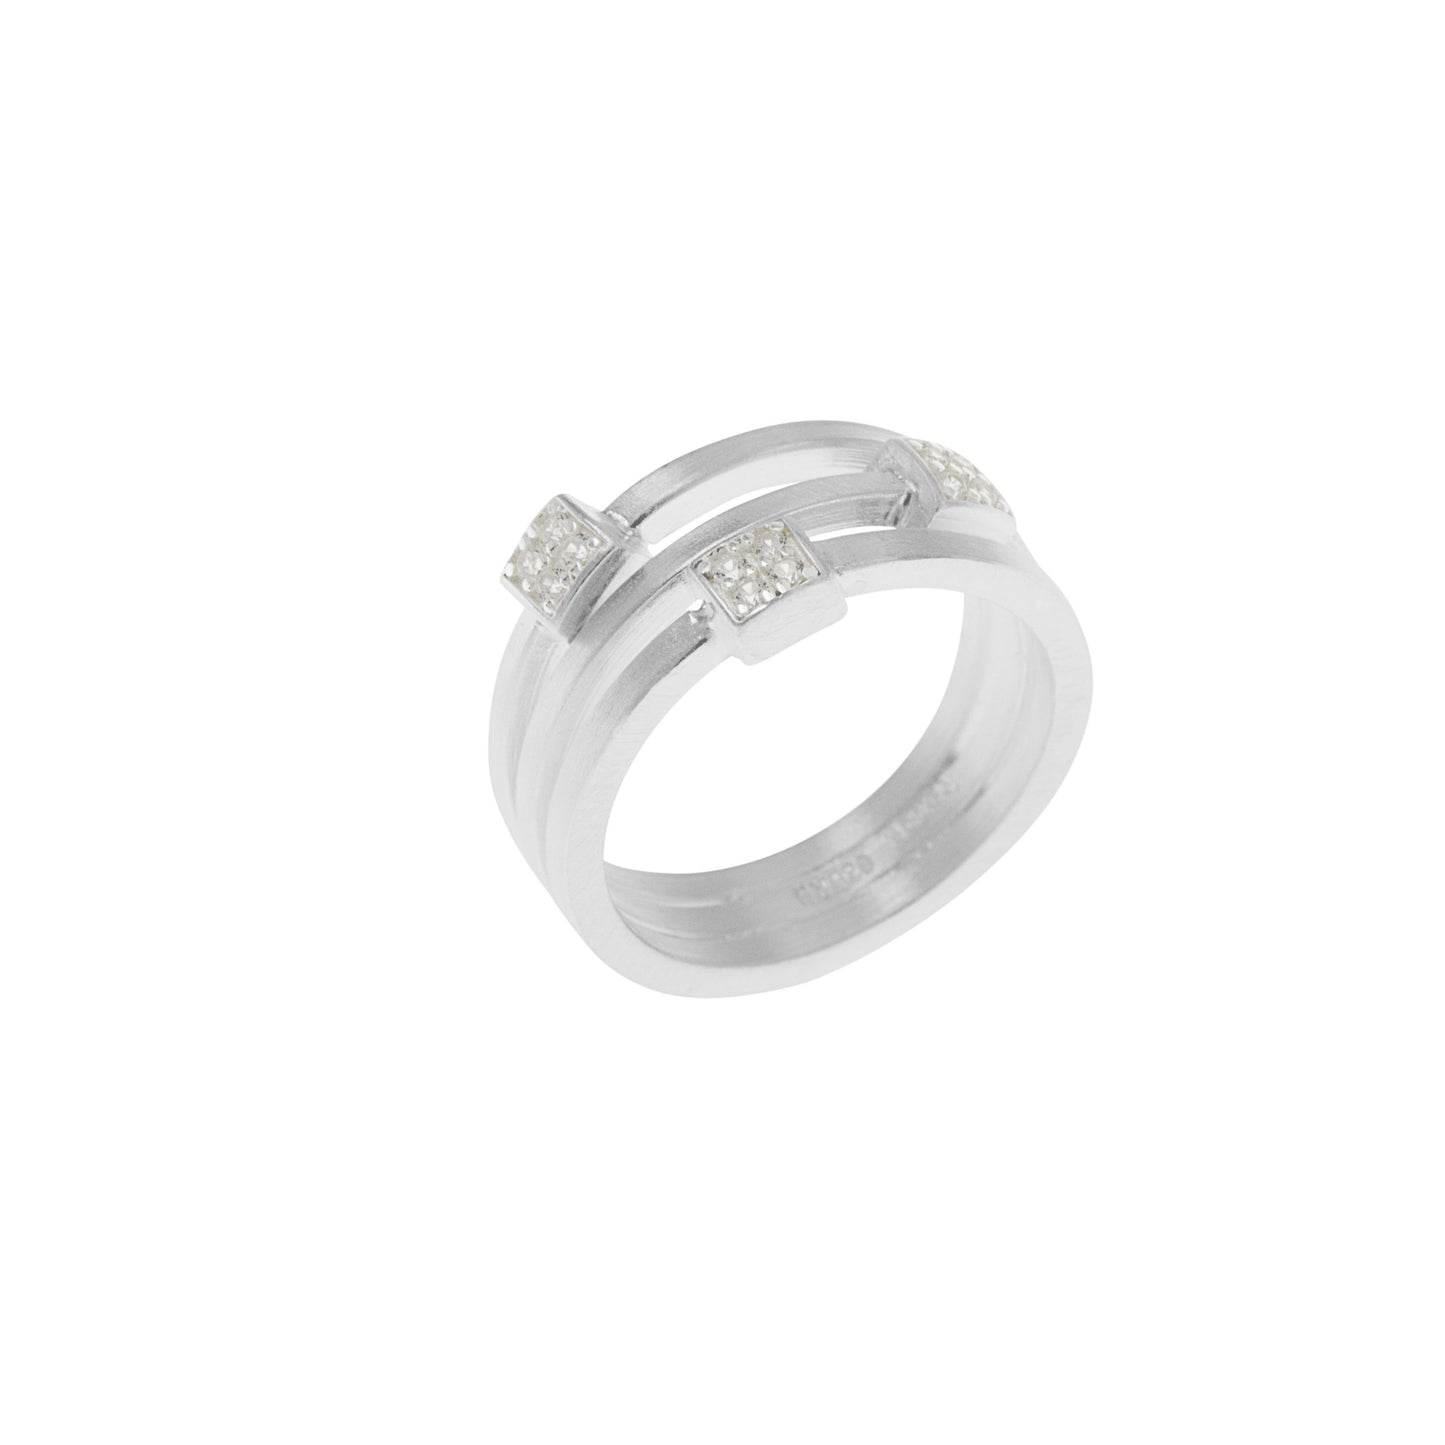 Tiple Band Ring